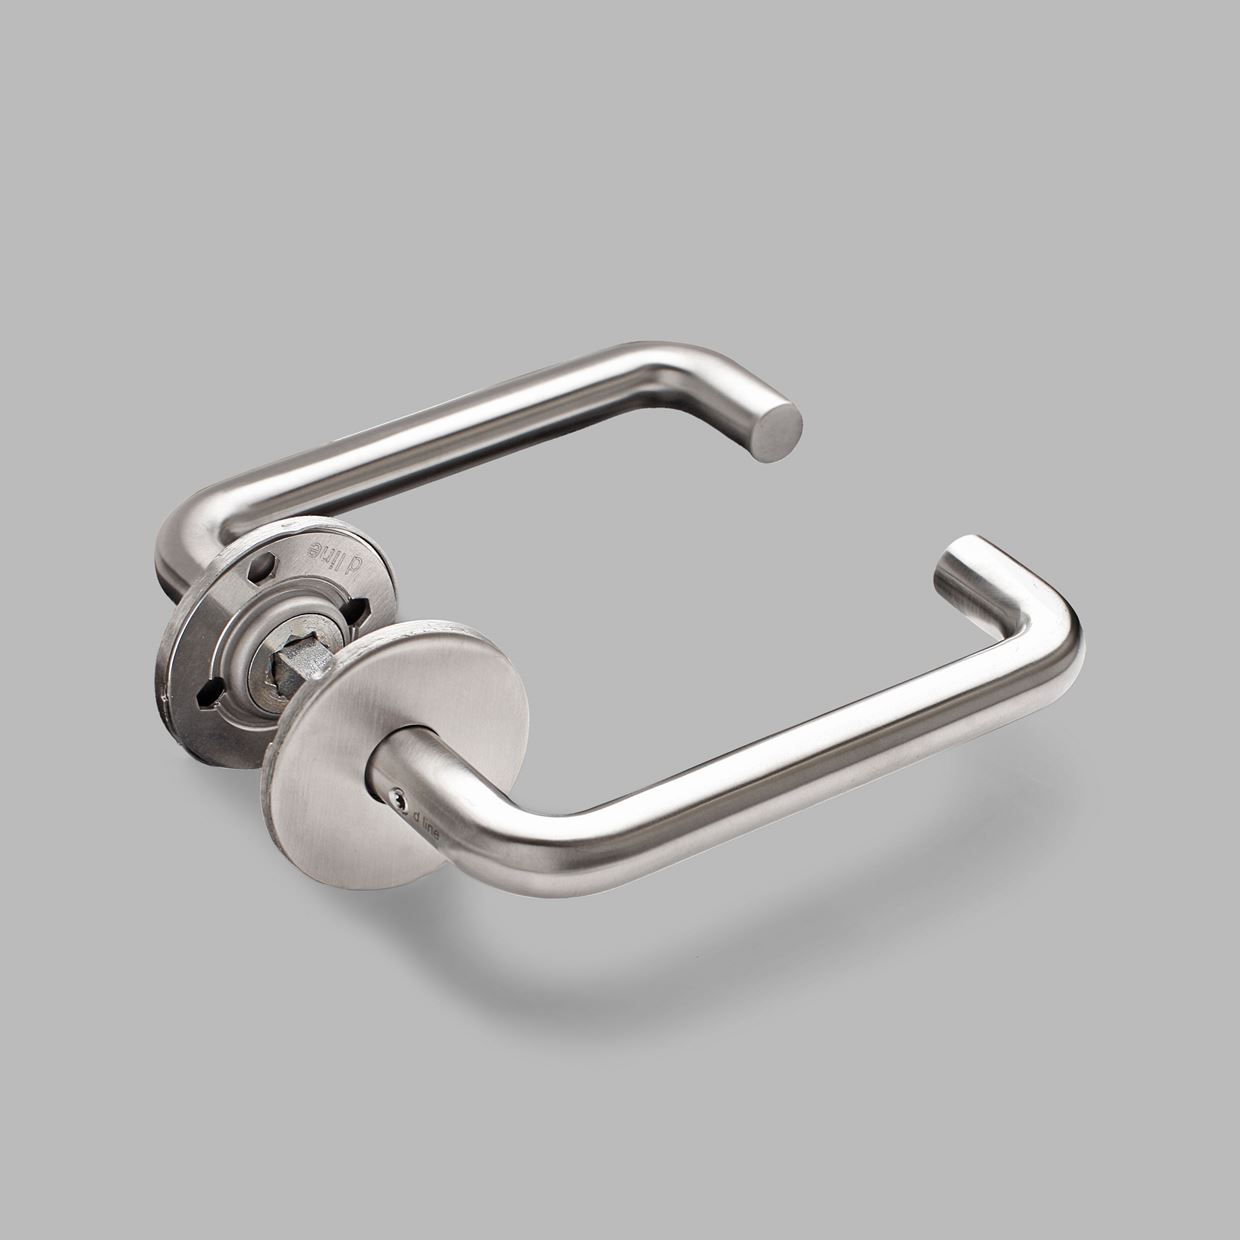 Lever handle | U | Knud d Holscher line collection